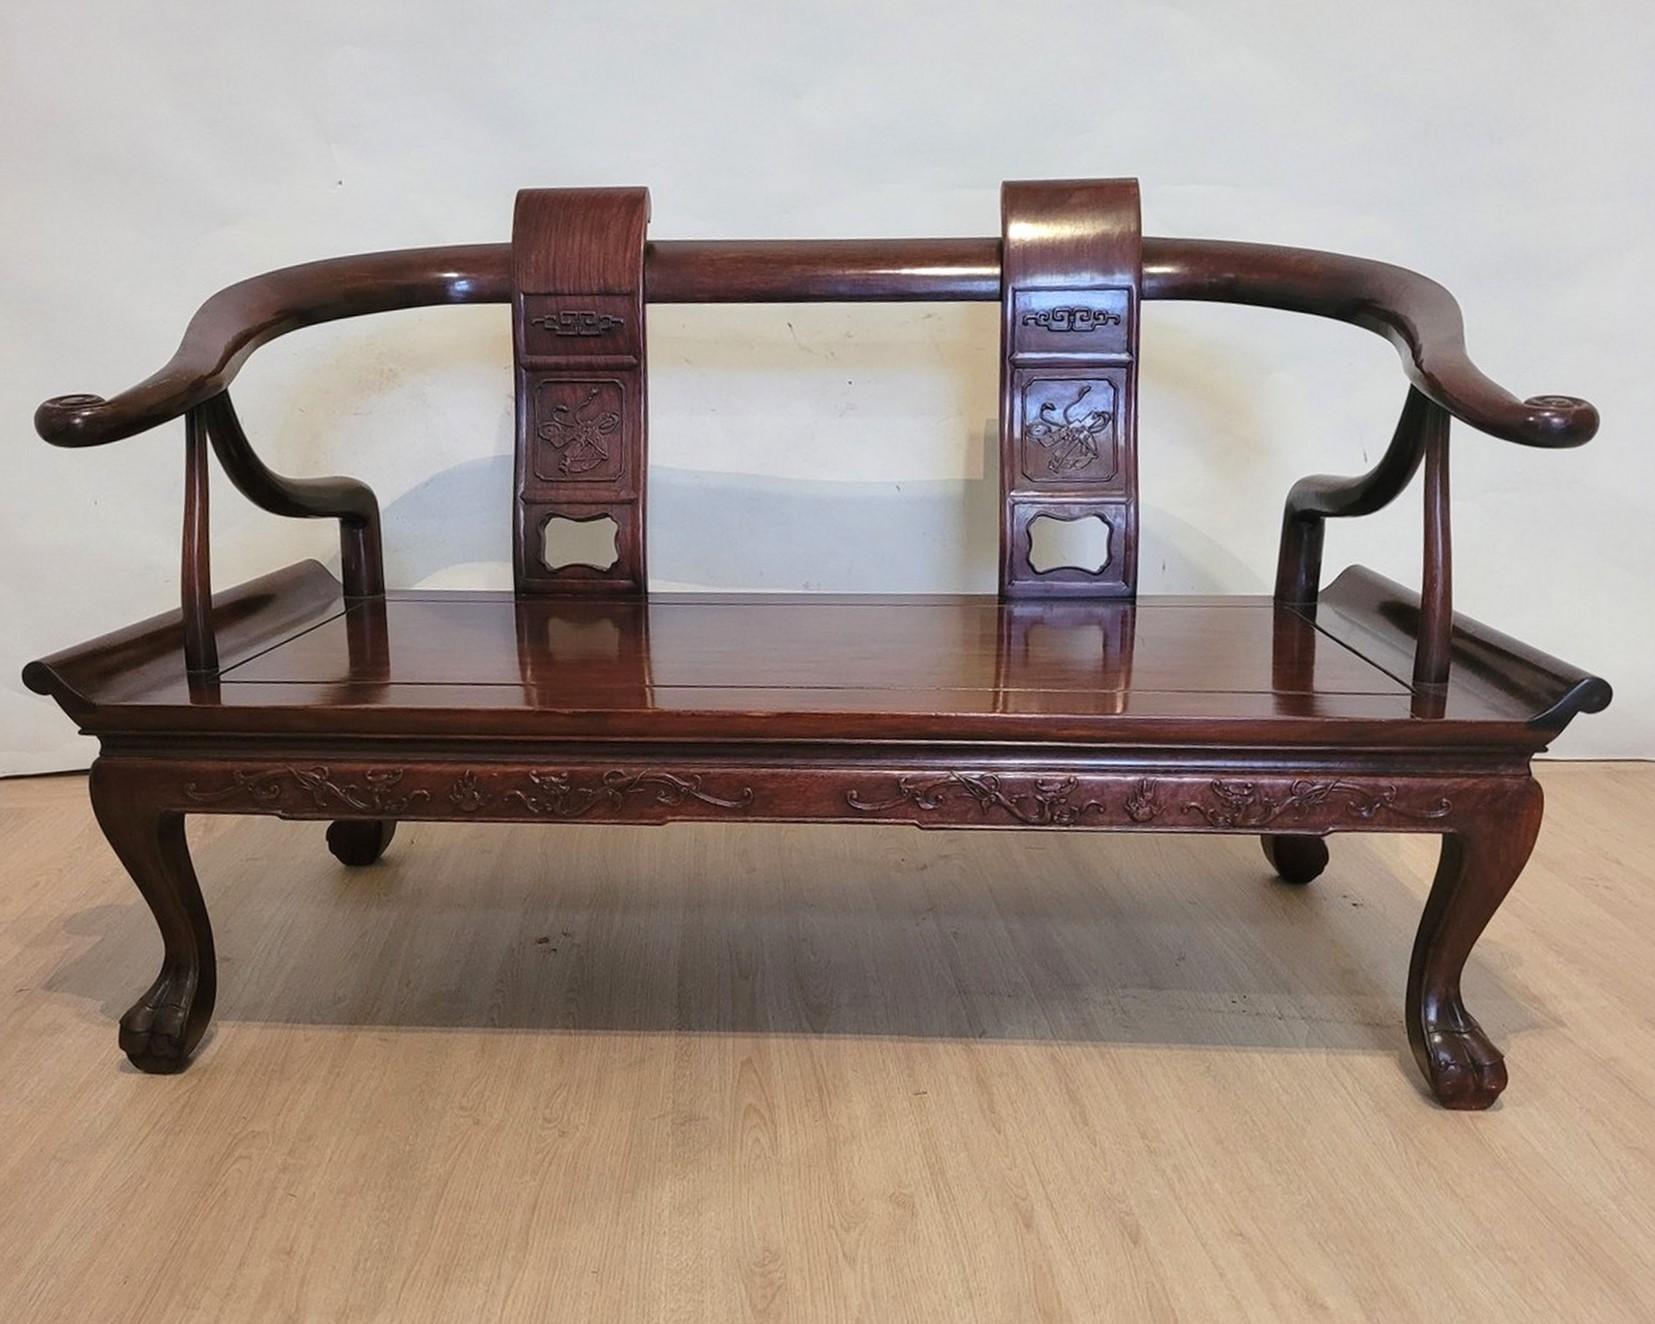 Very beautiful Chinese bench in carved exotic wood: the backrest comes forward to form the armrests and ends in snails, the backrest is also composed of 2 vertical wooden panels carved with symbols.
The feet are paw-shaped, the wooden seat is